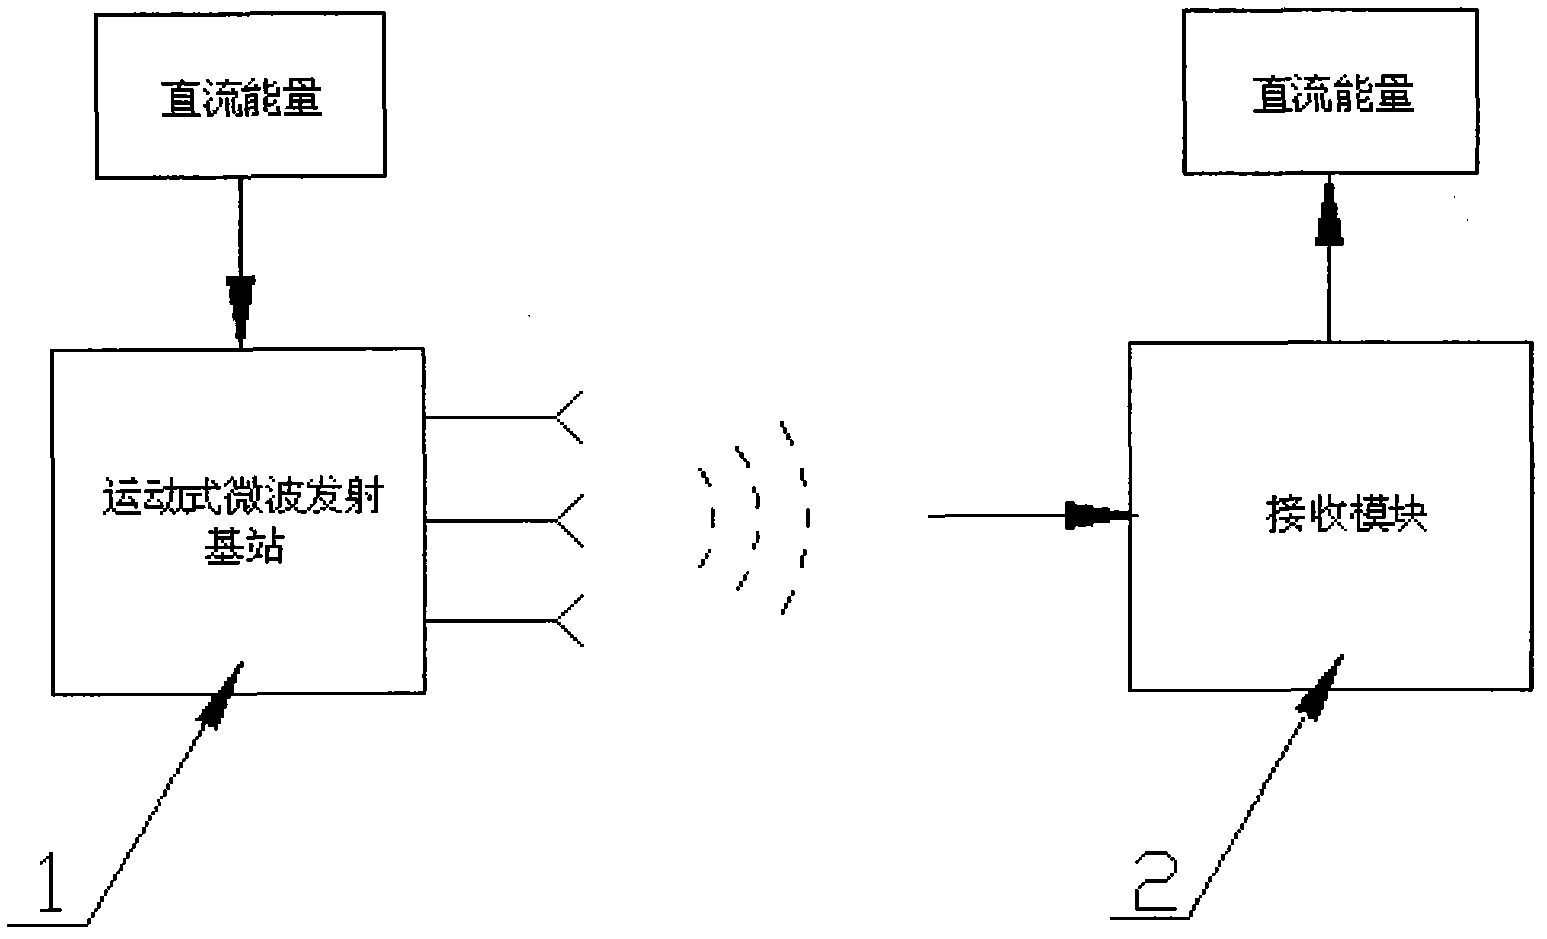 Motion type wireless electric energy transmission system